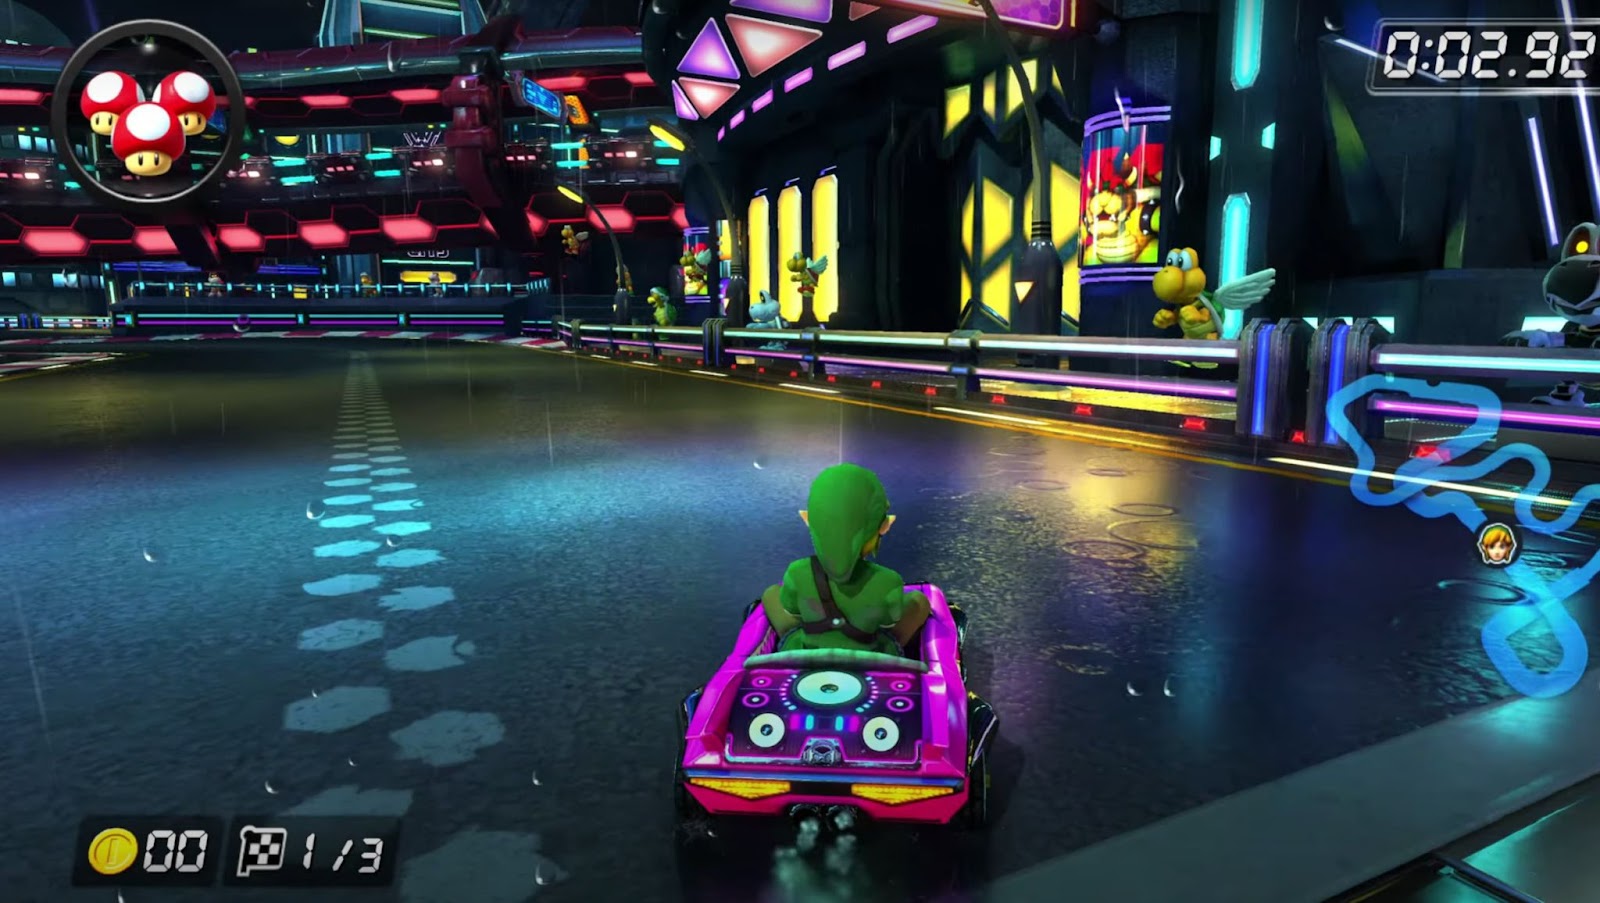 The Race Is On: Mario Kart 8 Is Coming!